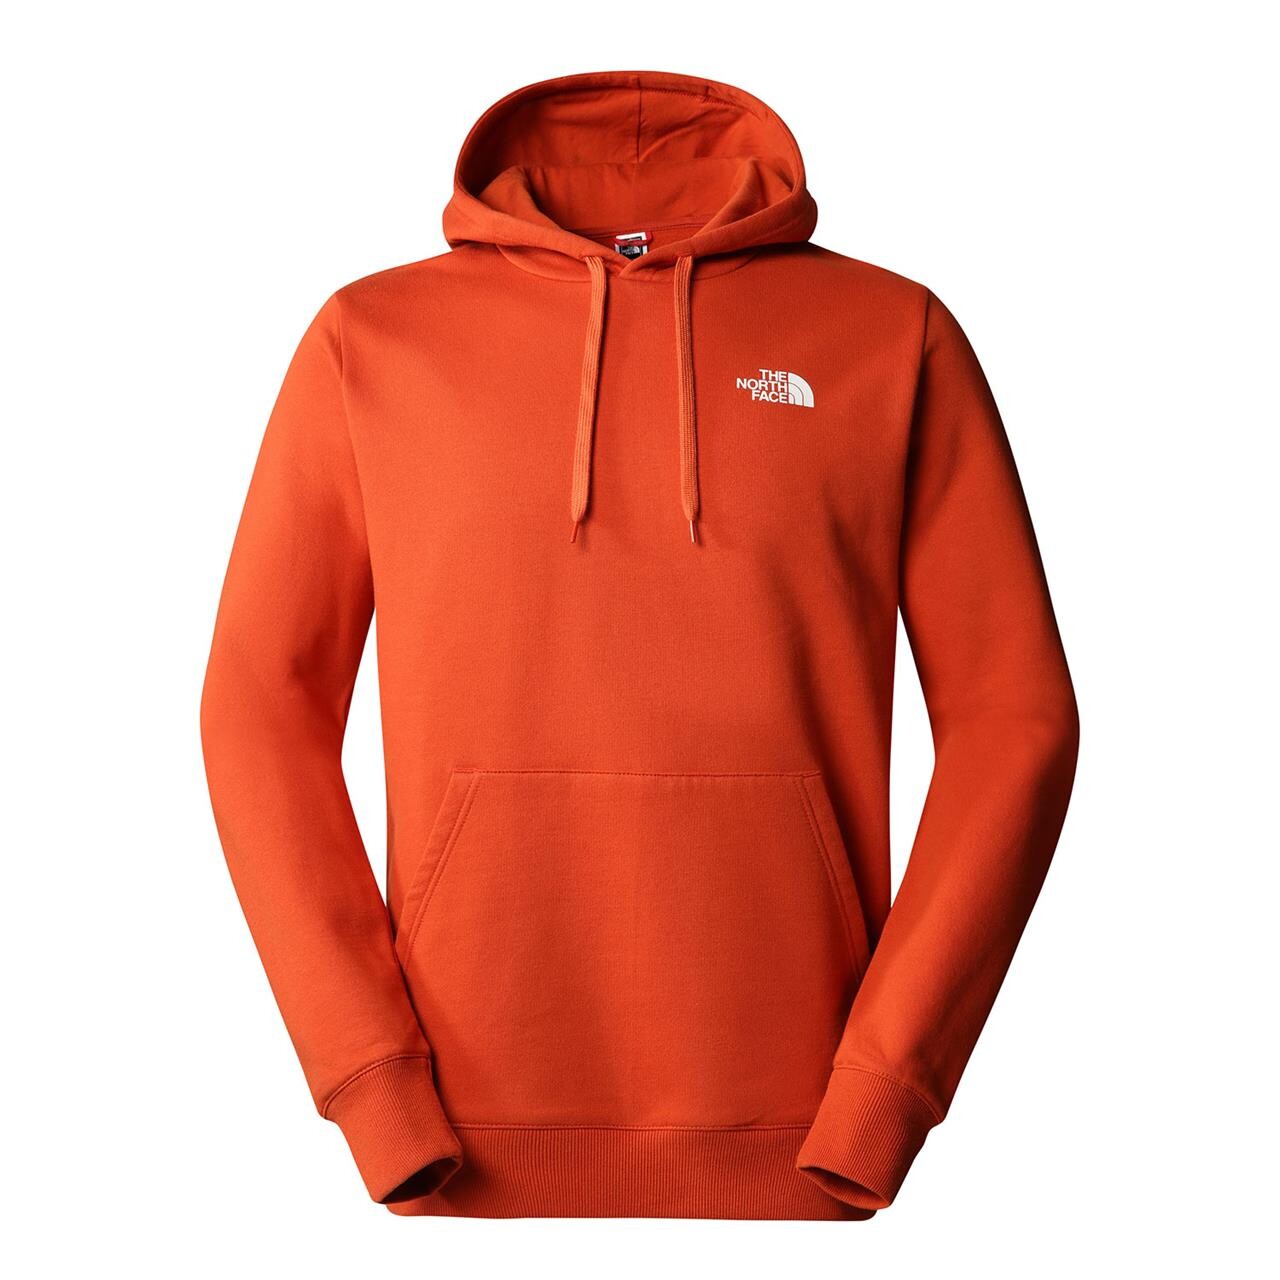 The North Face Mens Outdoor Graphic Hoodie Light (Orange (RUSTED BRONZE) Small)